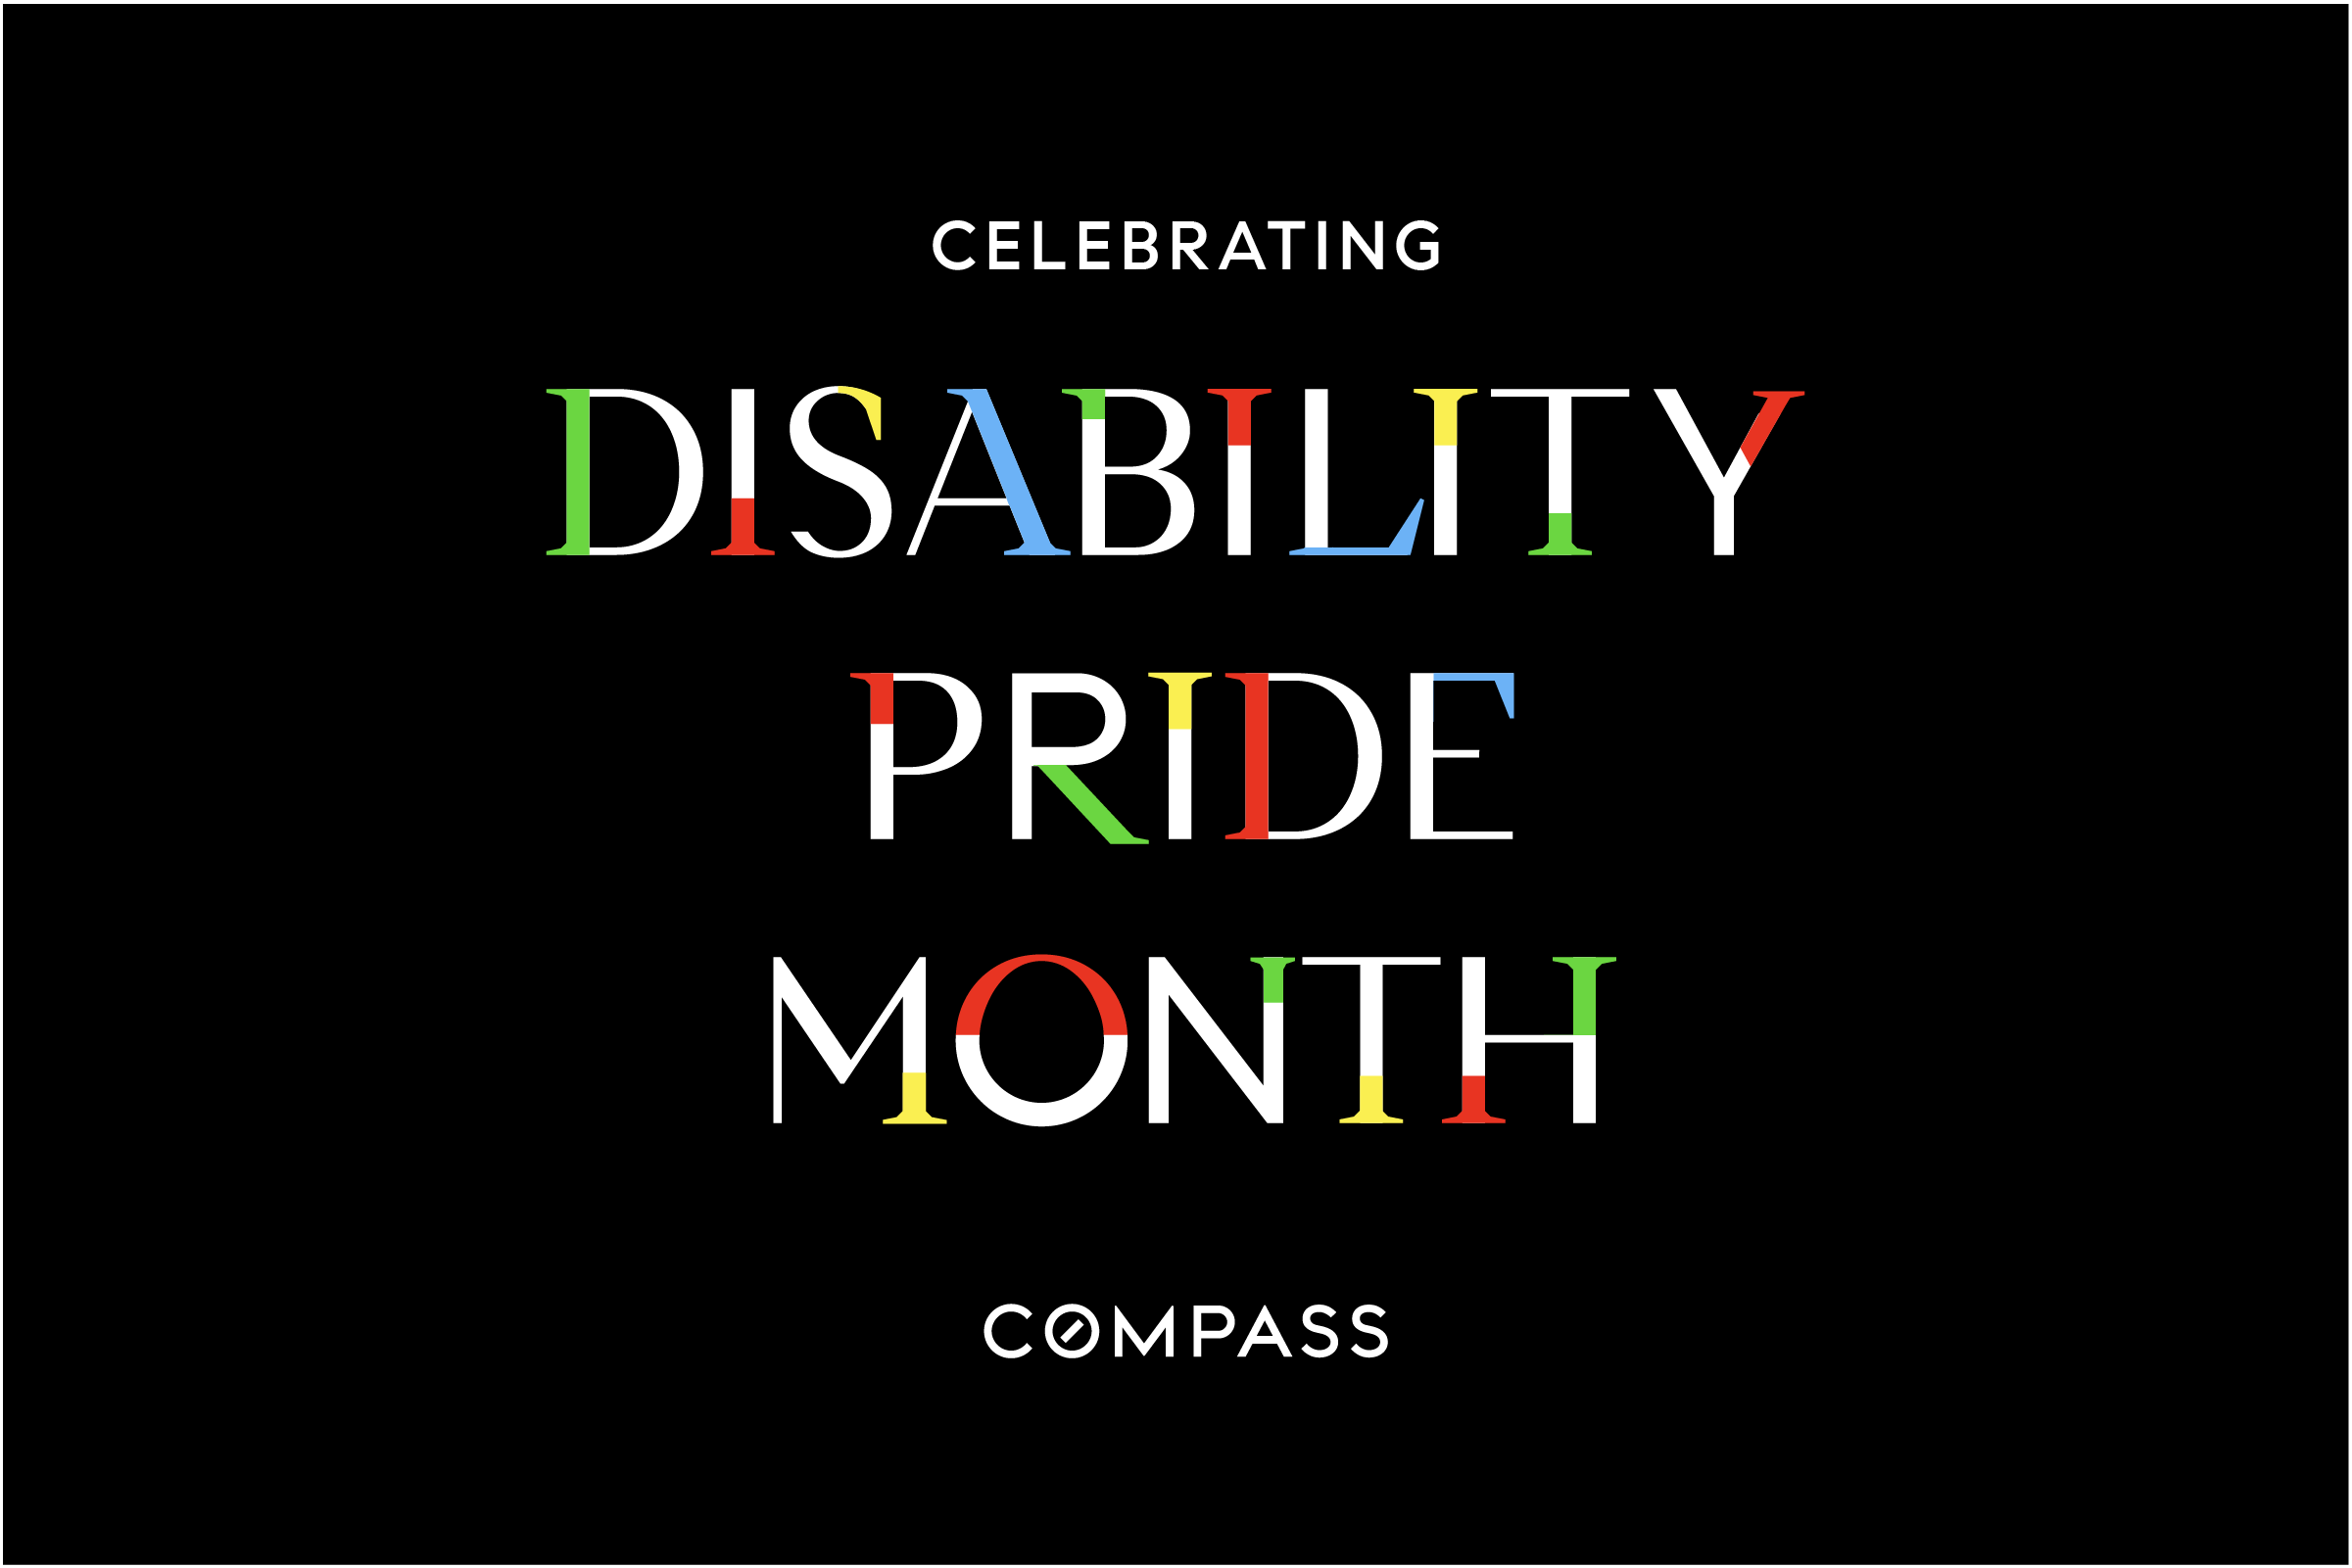 Celebrating Disability Pride Month with Our Compass Community